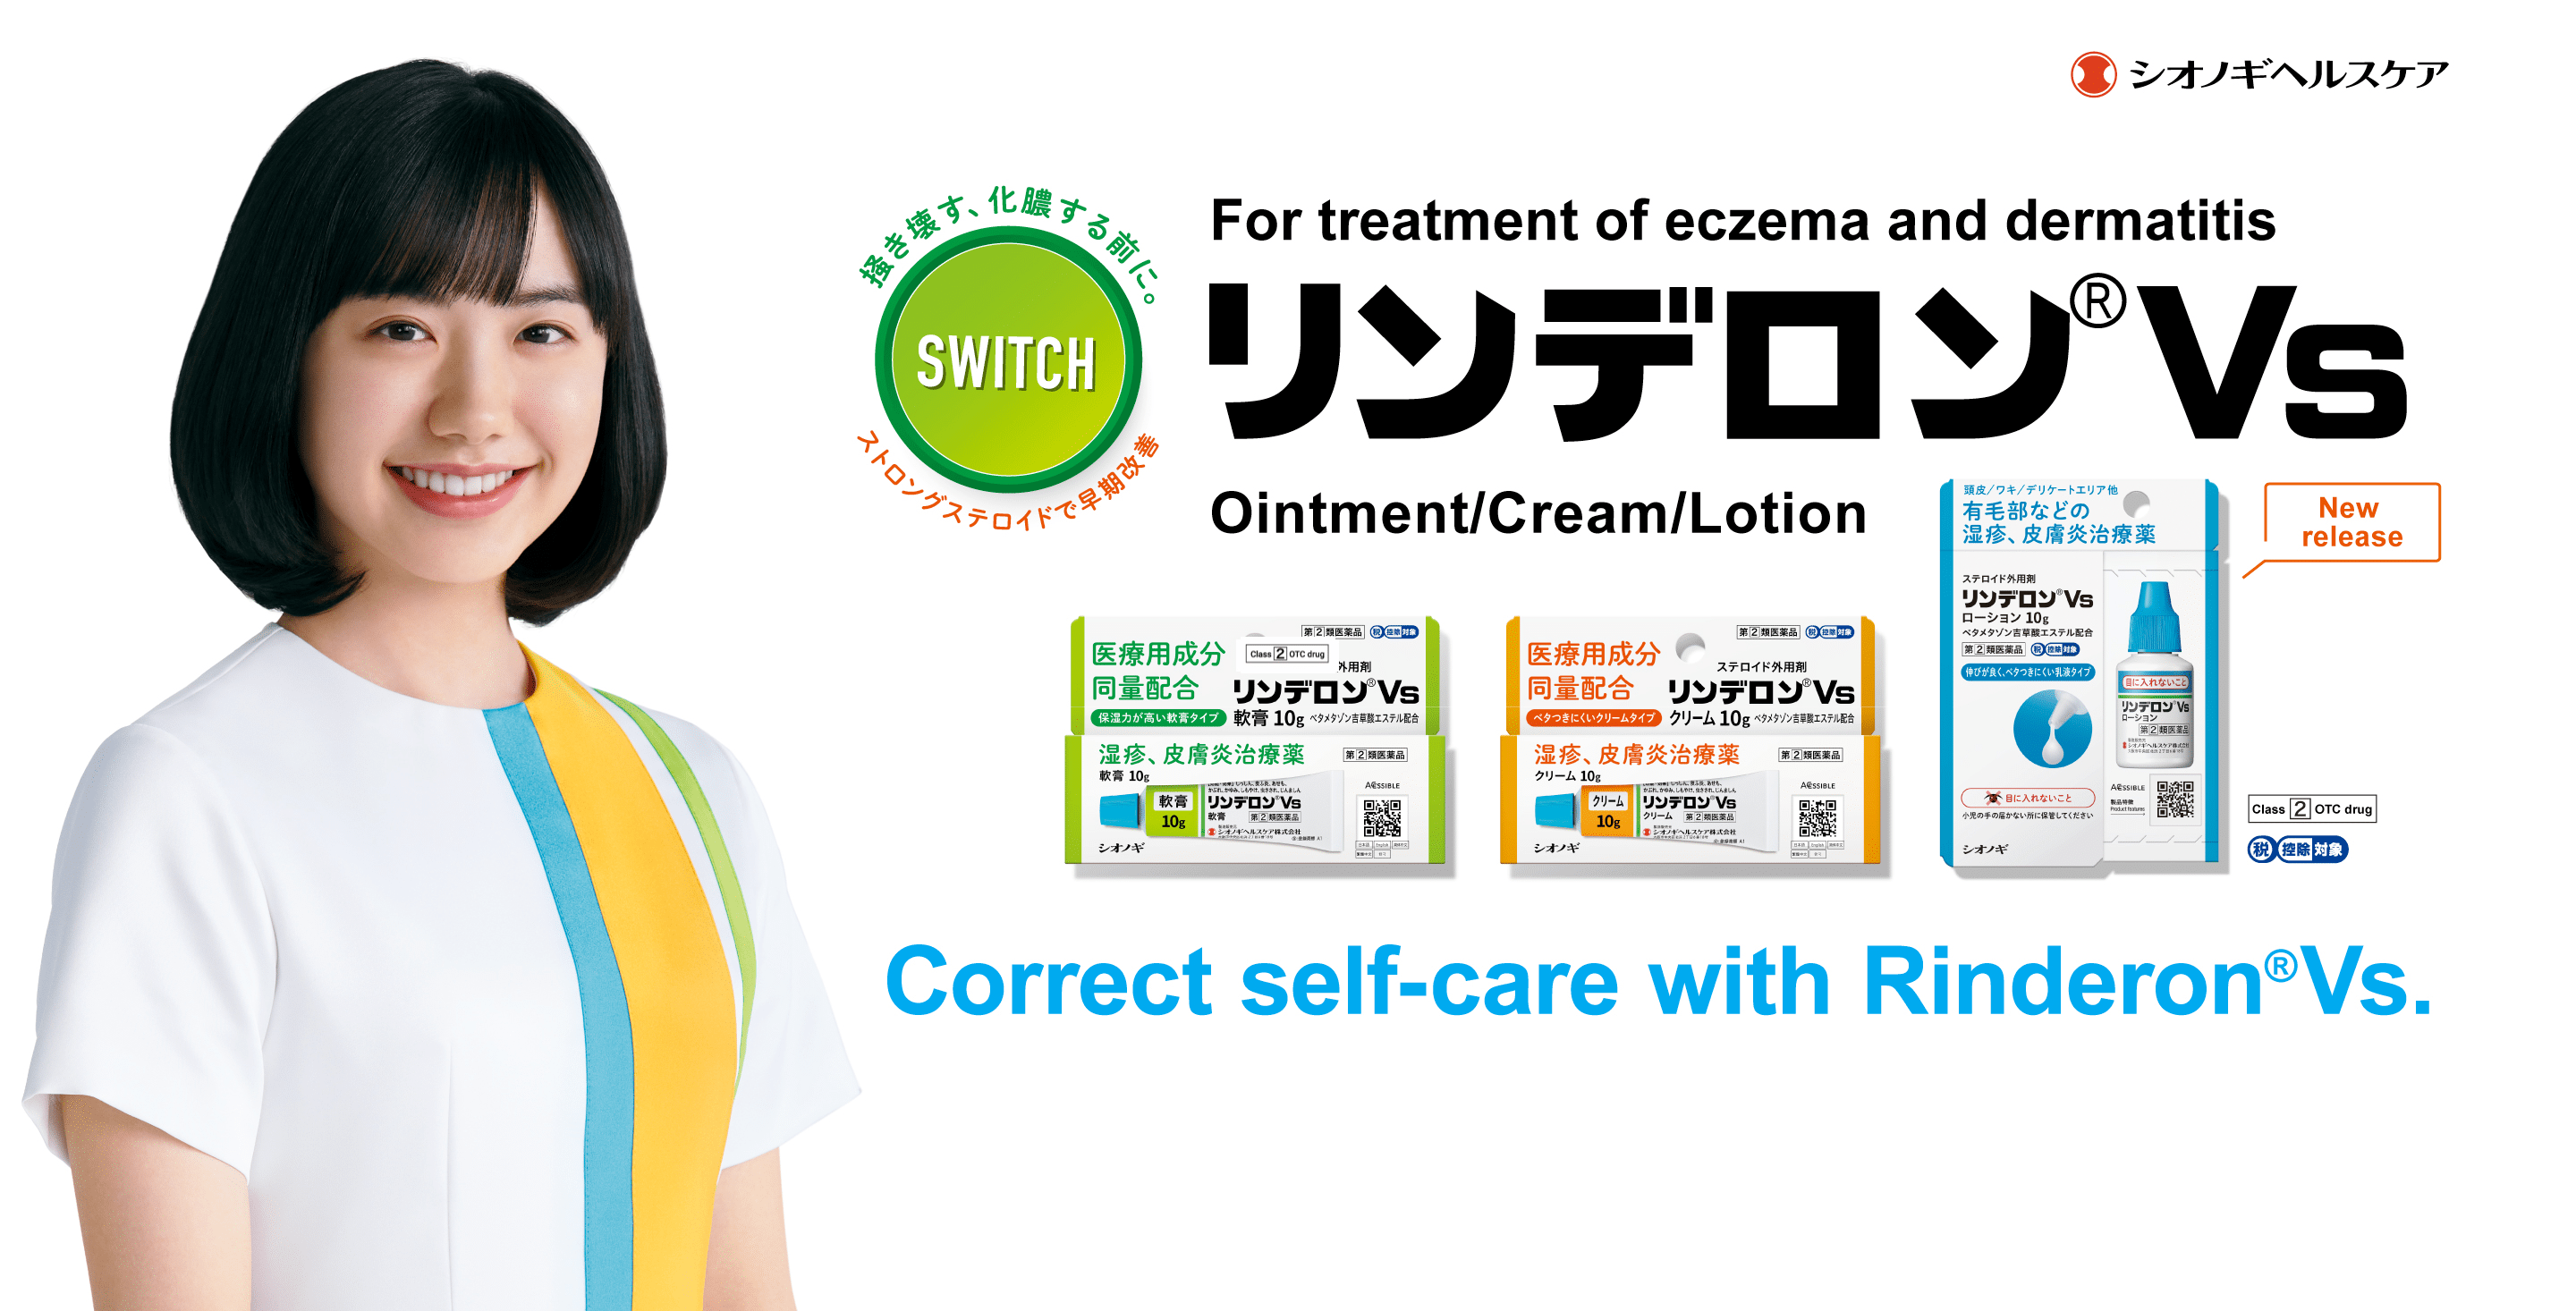 Correct self-care with Rinderon®Vs. For treatment of eczema and dermatitis / Contains the same amounts of the ingredients of the prescription drug